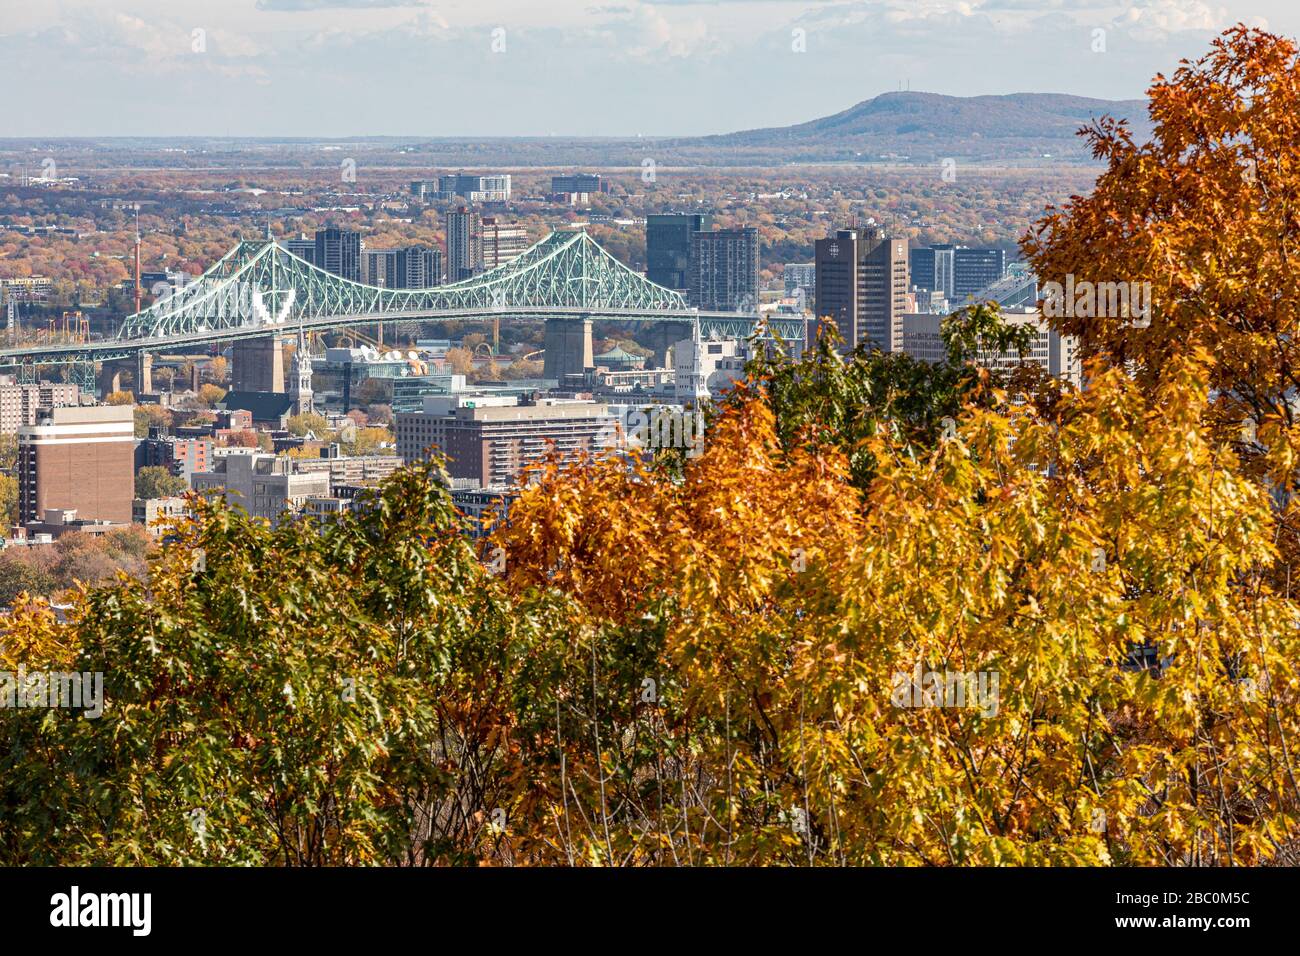 AUTUMN COLORS IN MONT-ROYAL PARK AND VIEW OF THE JACQUES CARTIER BRIDGE AND CITY OF MONTREAL, QUEBEC, CANADA Stock Photo